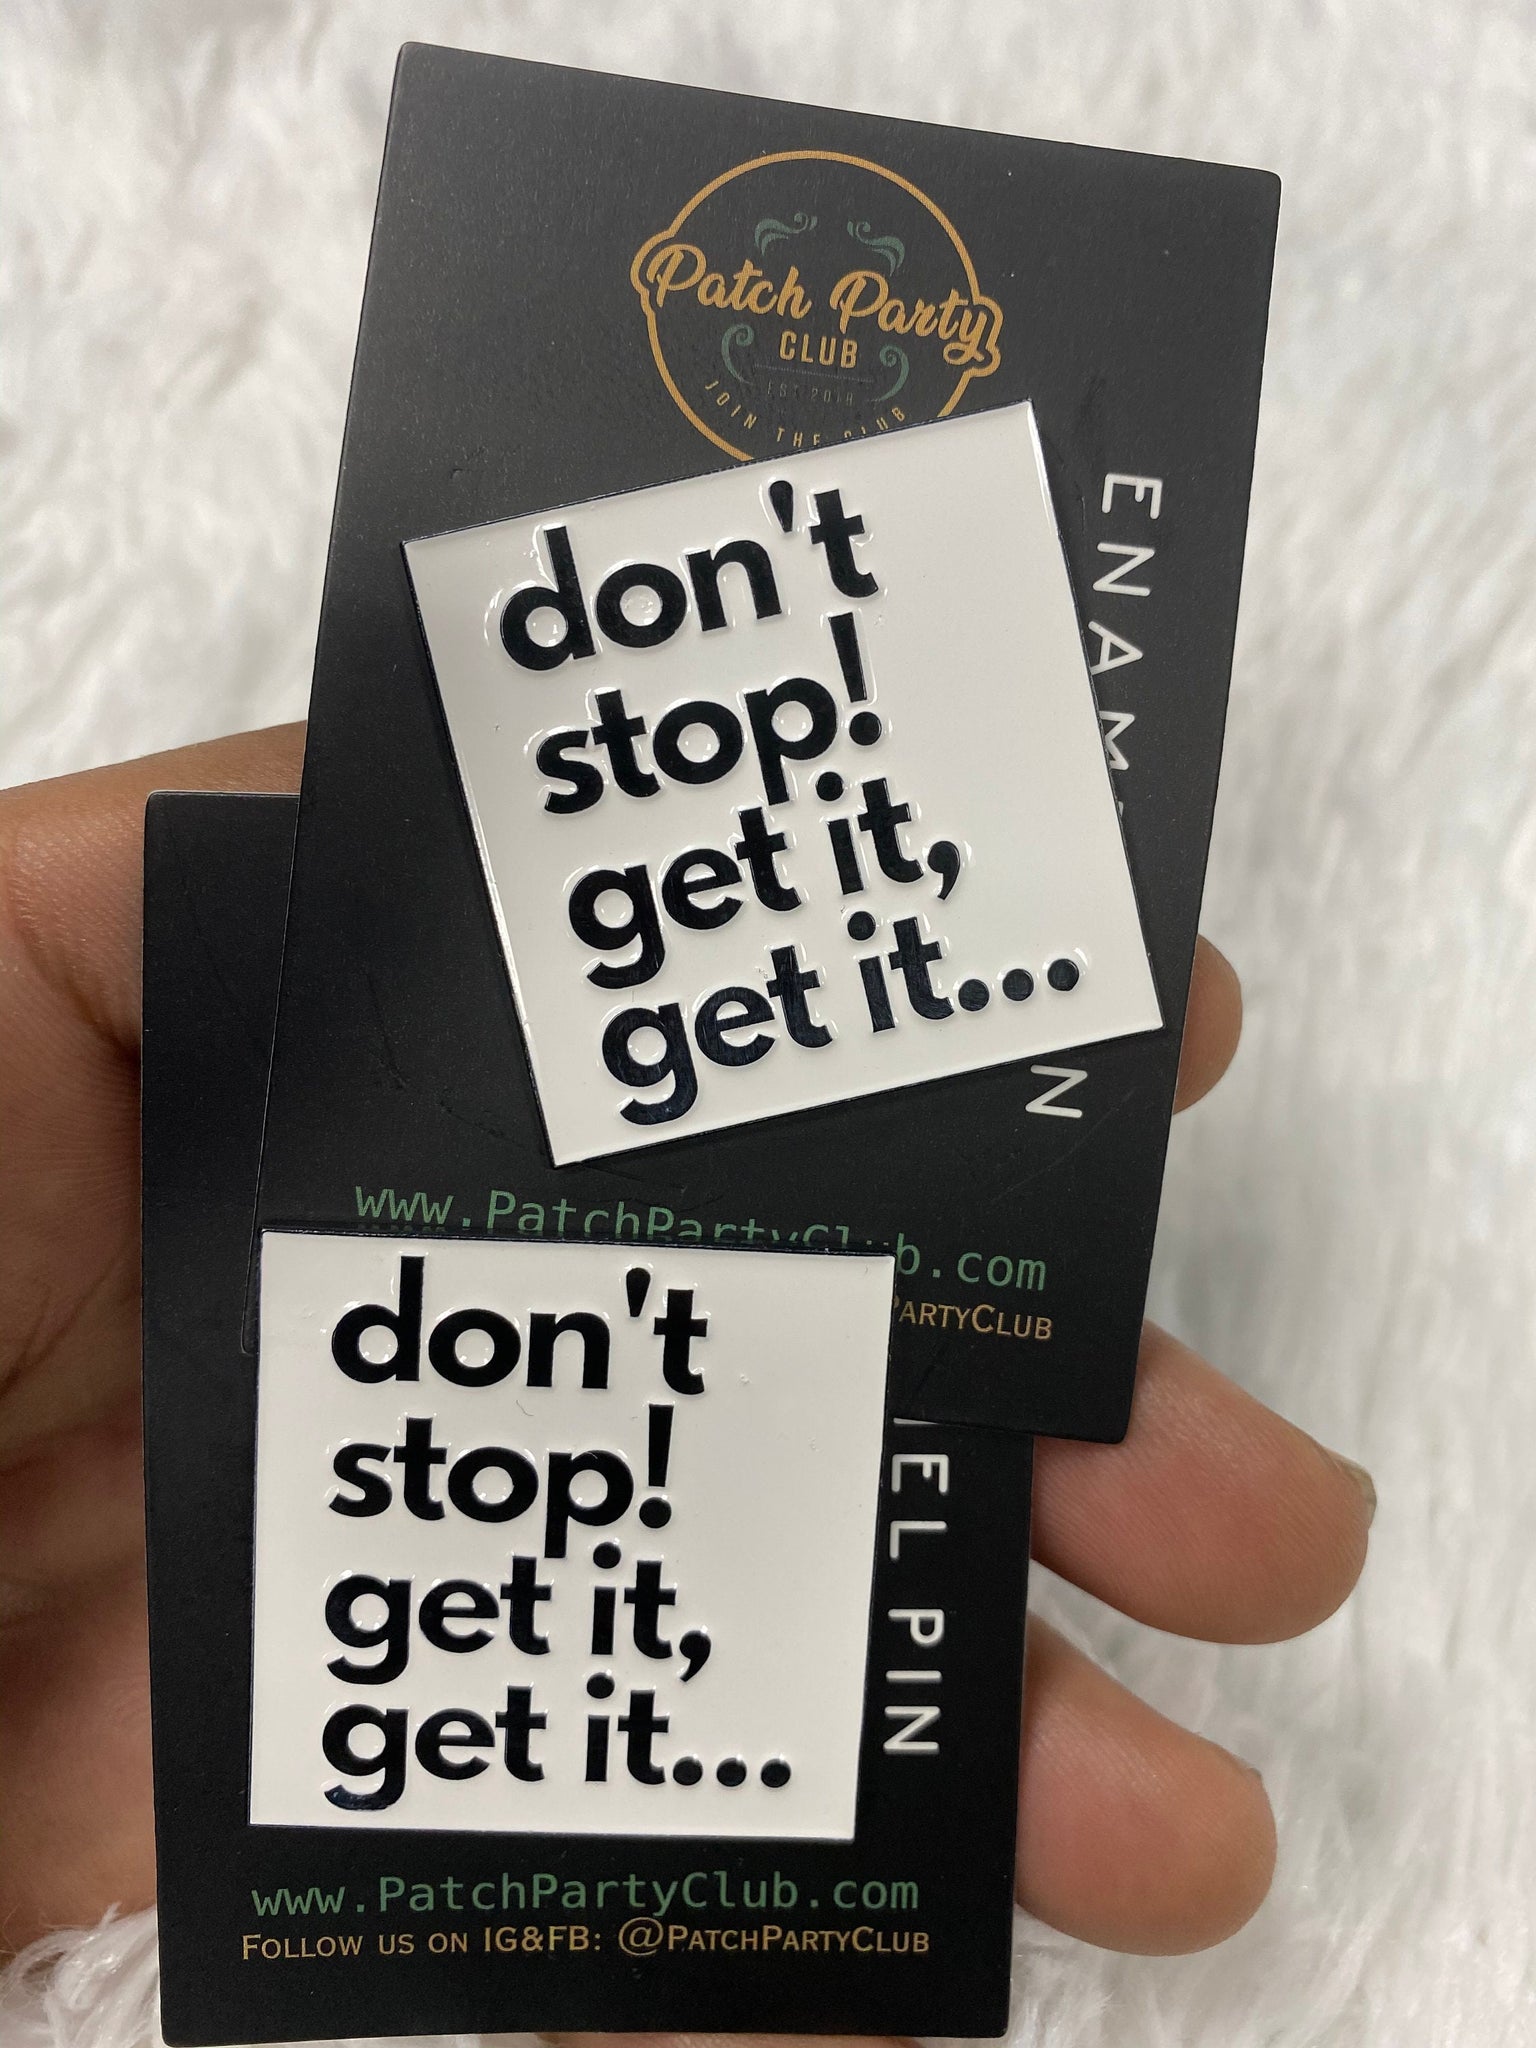 New, Enamel Pin "Don't Stop Get IT Get IT" Exclusive Lapel Pin, Size 1.77 inches, w/Butterfly Clutch, Cool Pin For Apparel